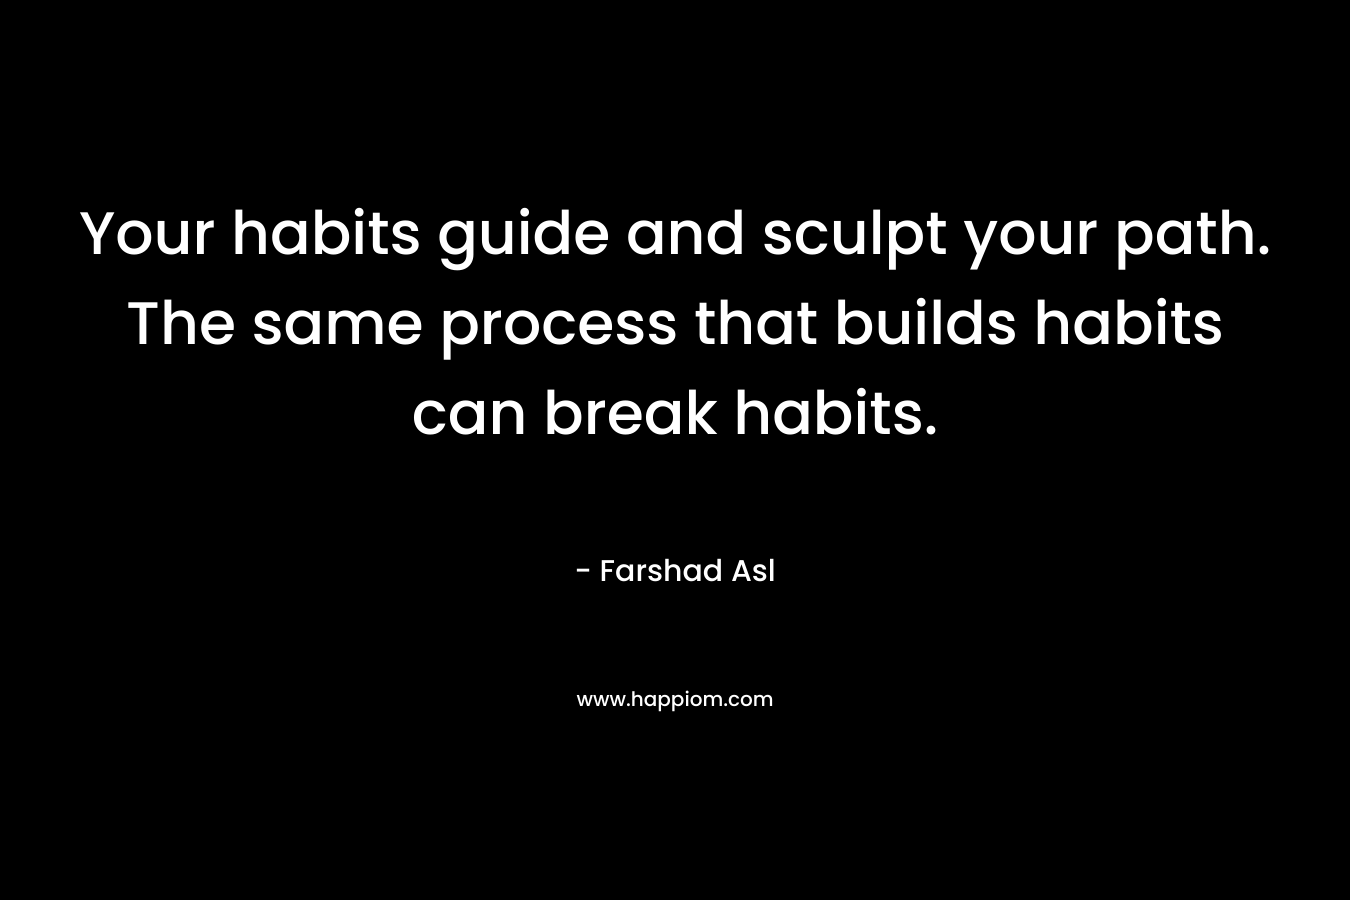 Your habits guide and sculpt your path. The same process that builds habits can break habits. – Farshad Asl